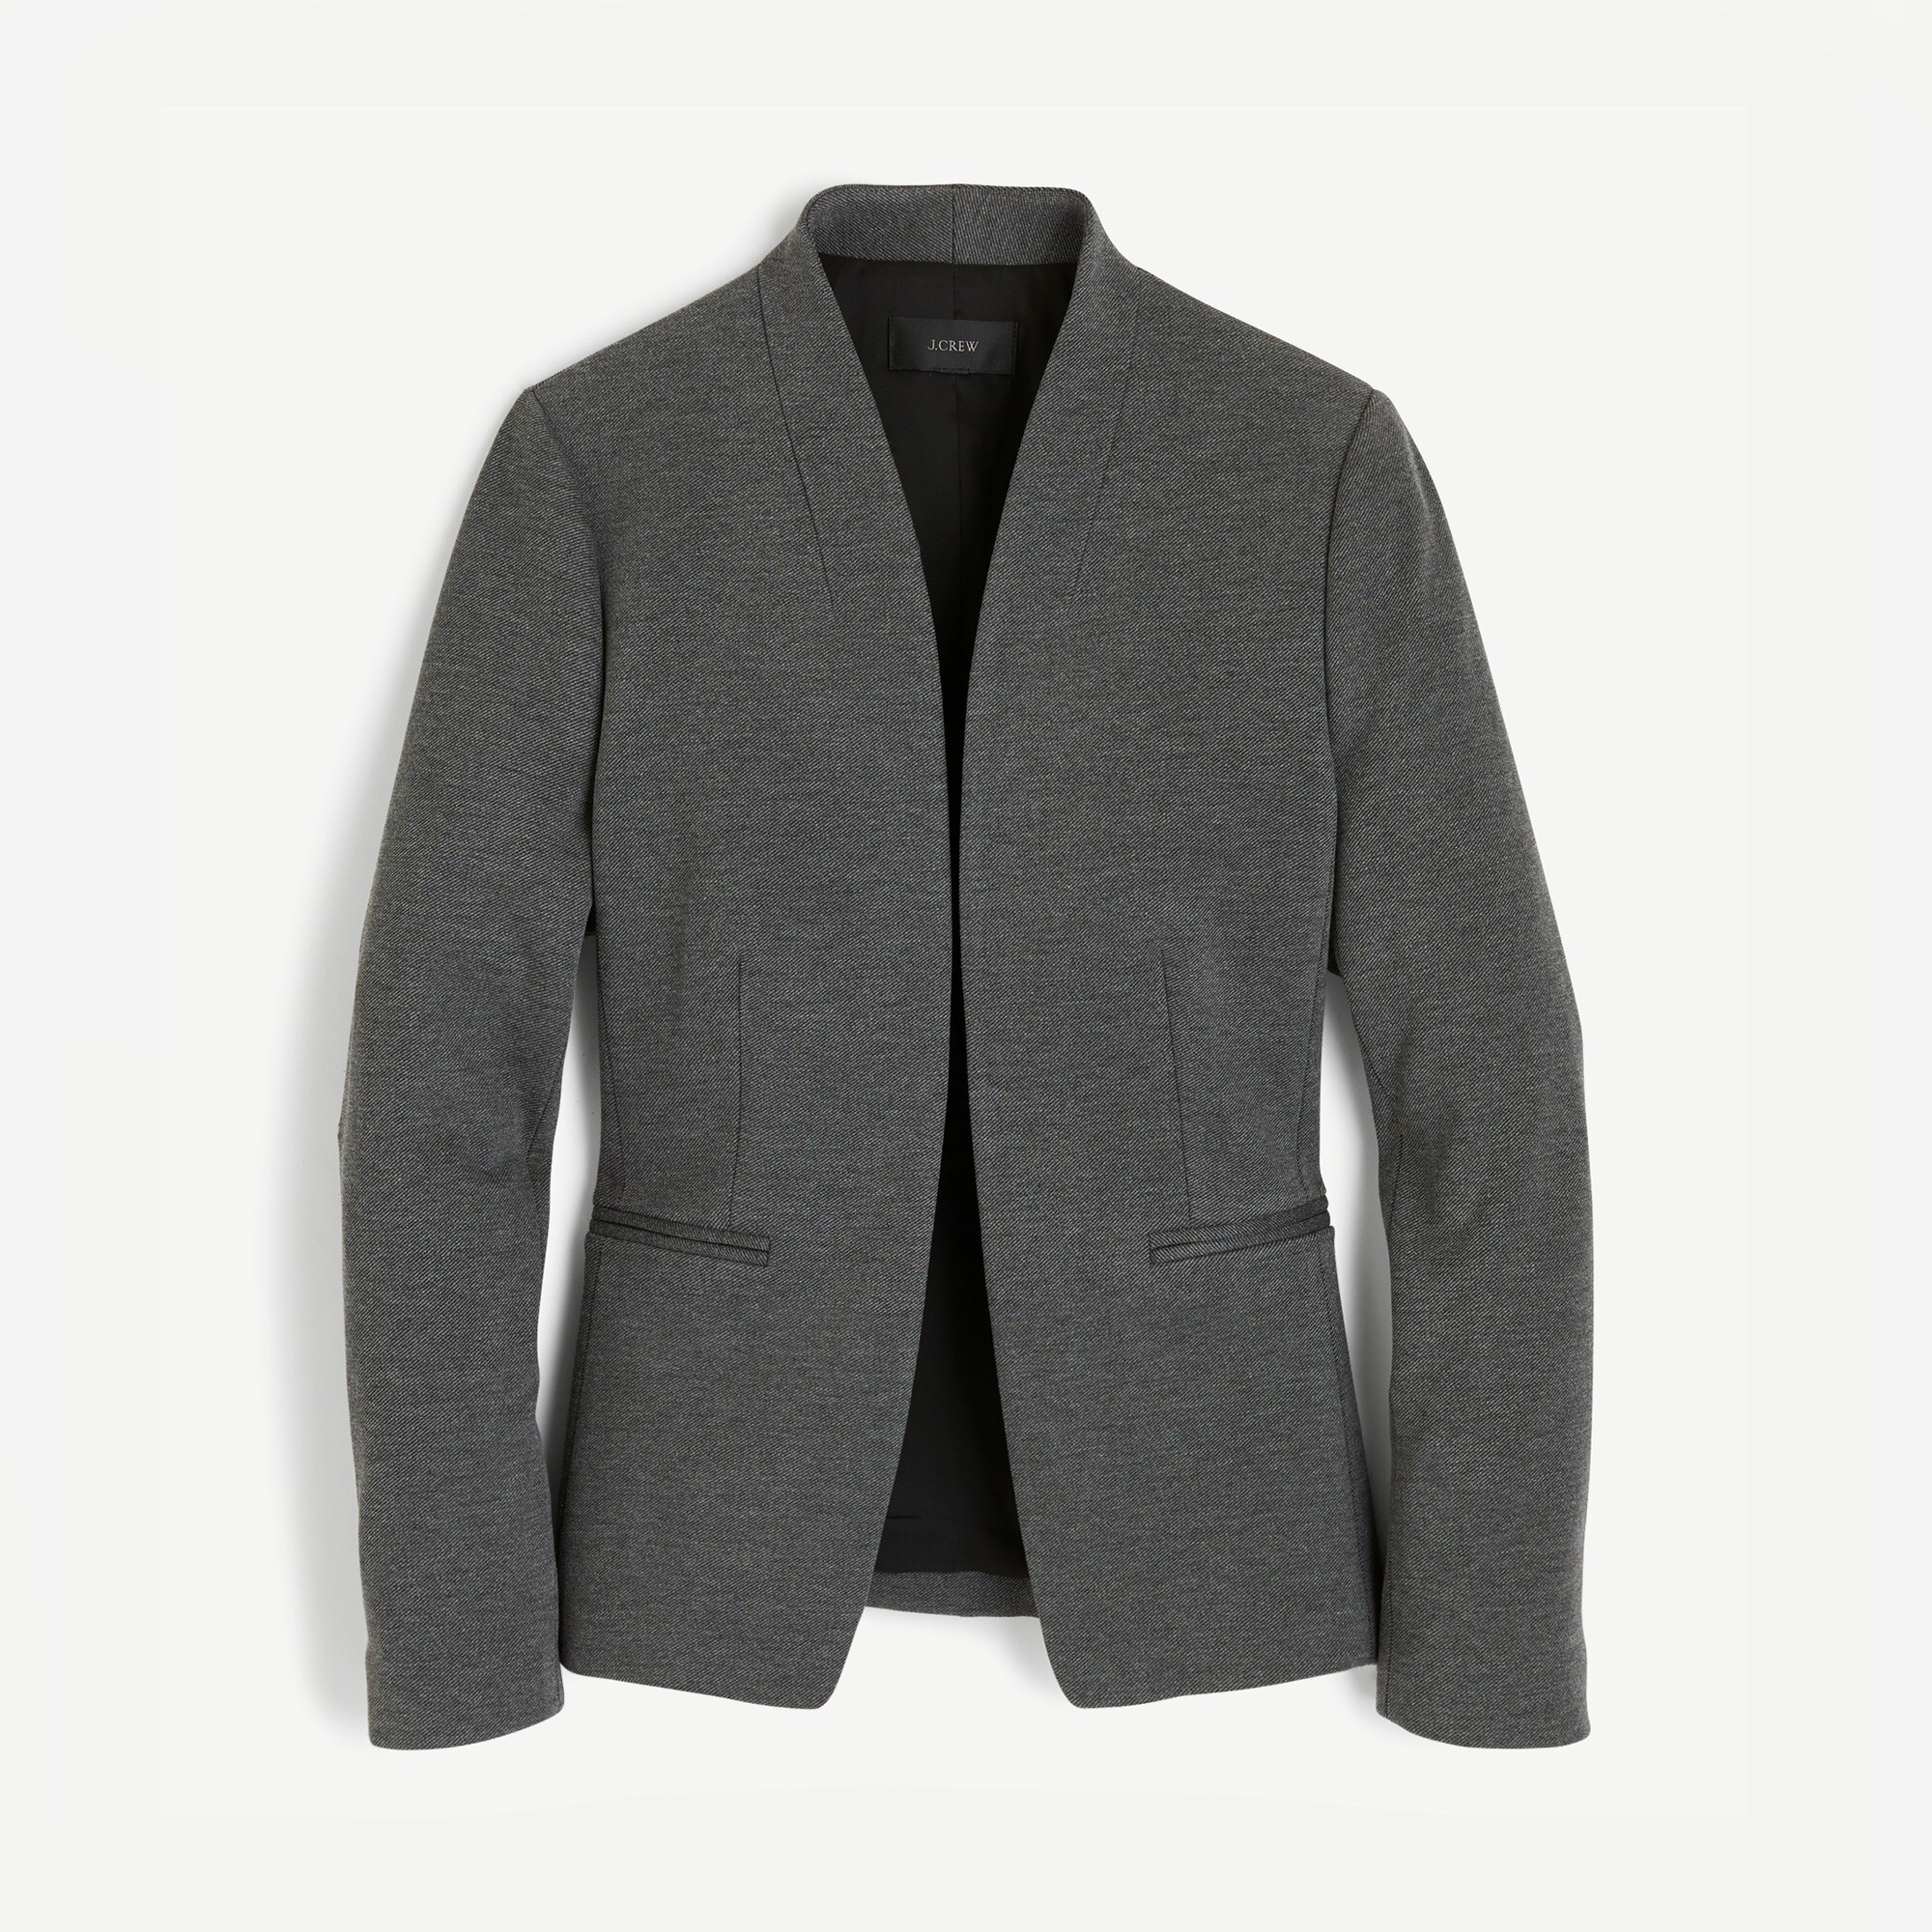  Tall going-out blazer in stretch twill